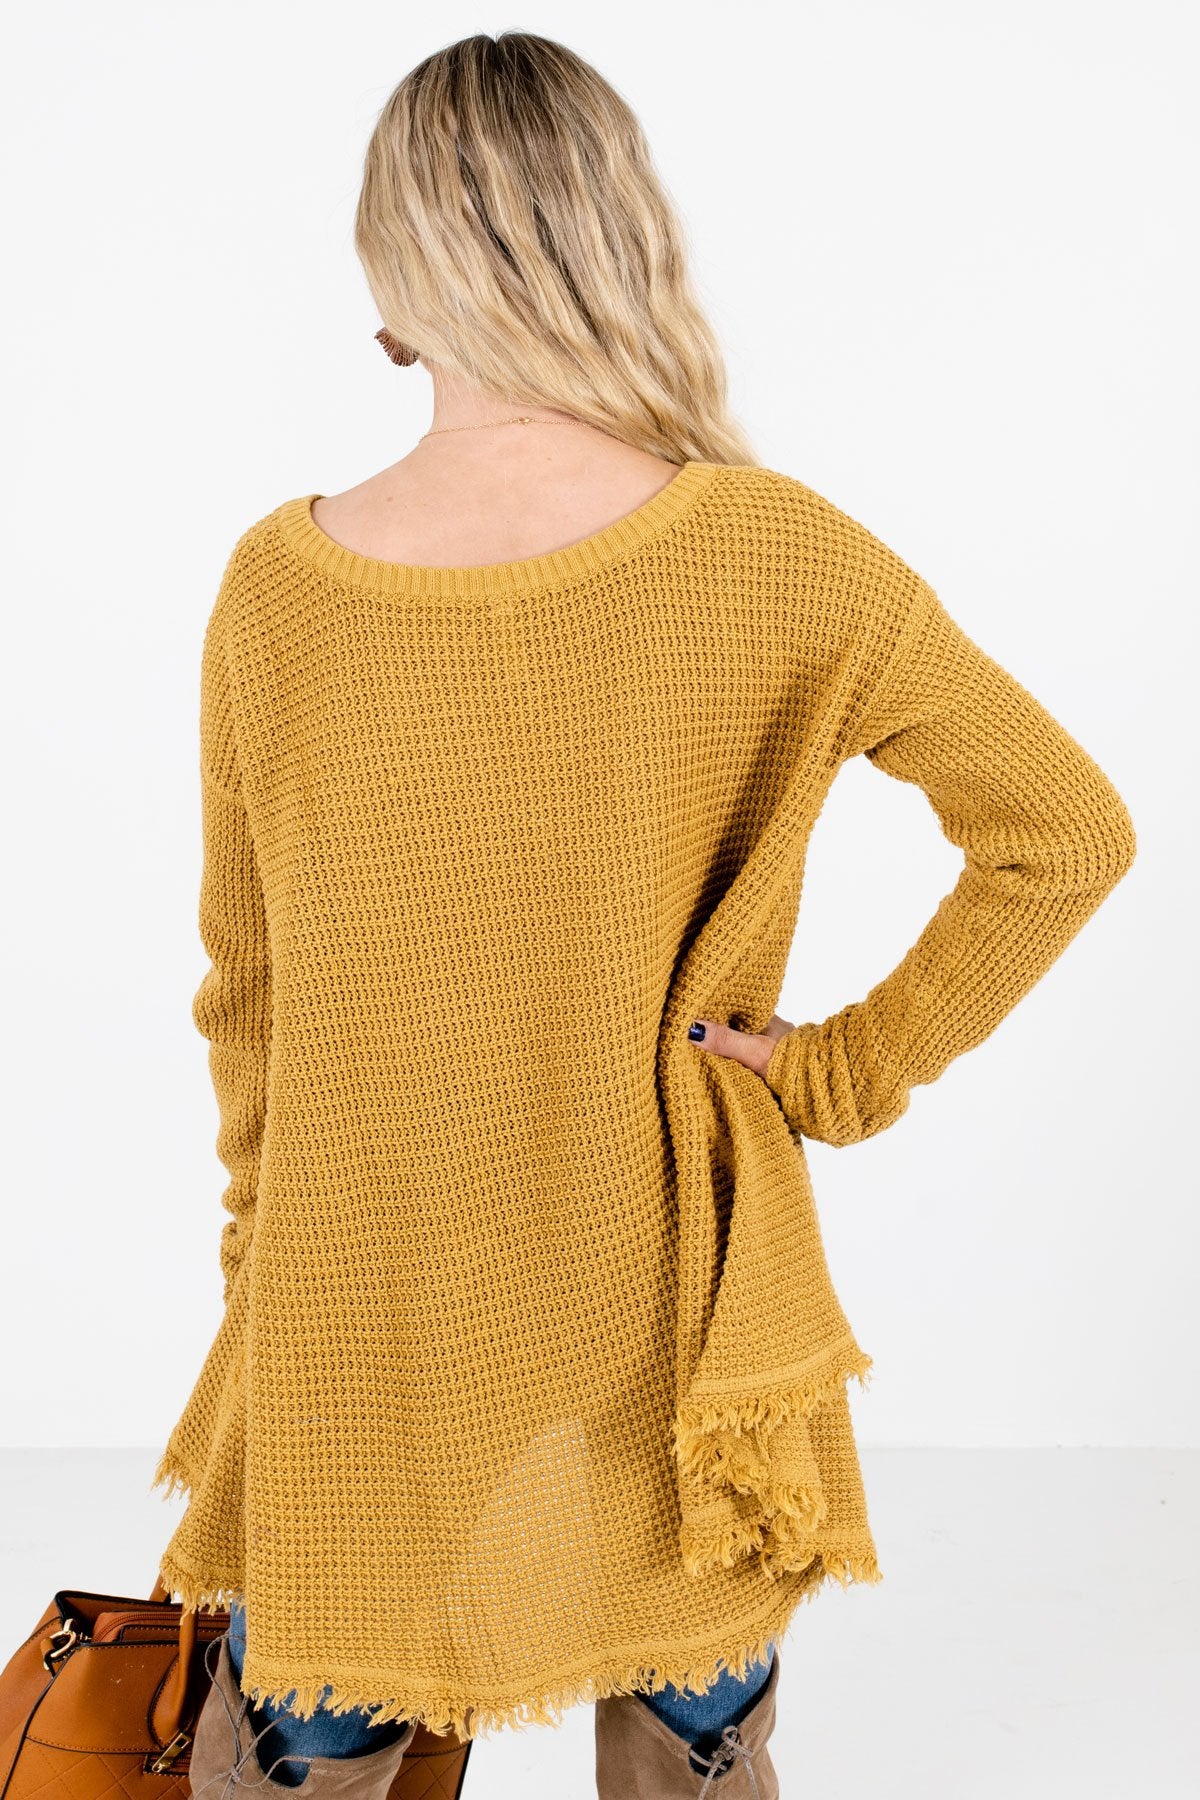 Women’s Mustard Oversized Relaxed Fit Boutique Sweater